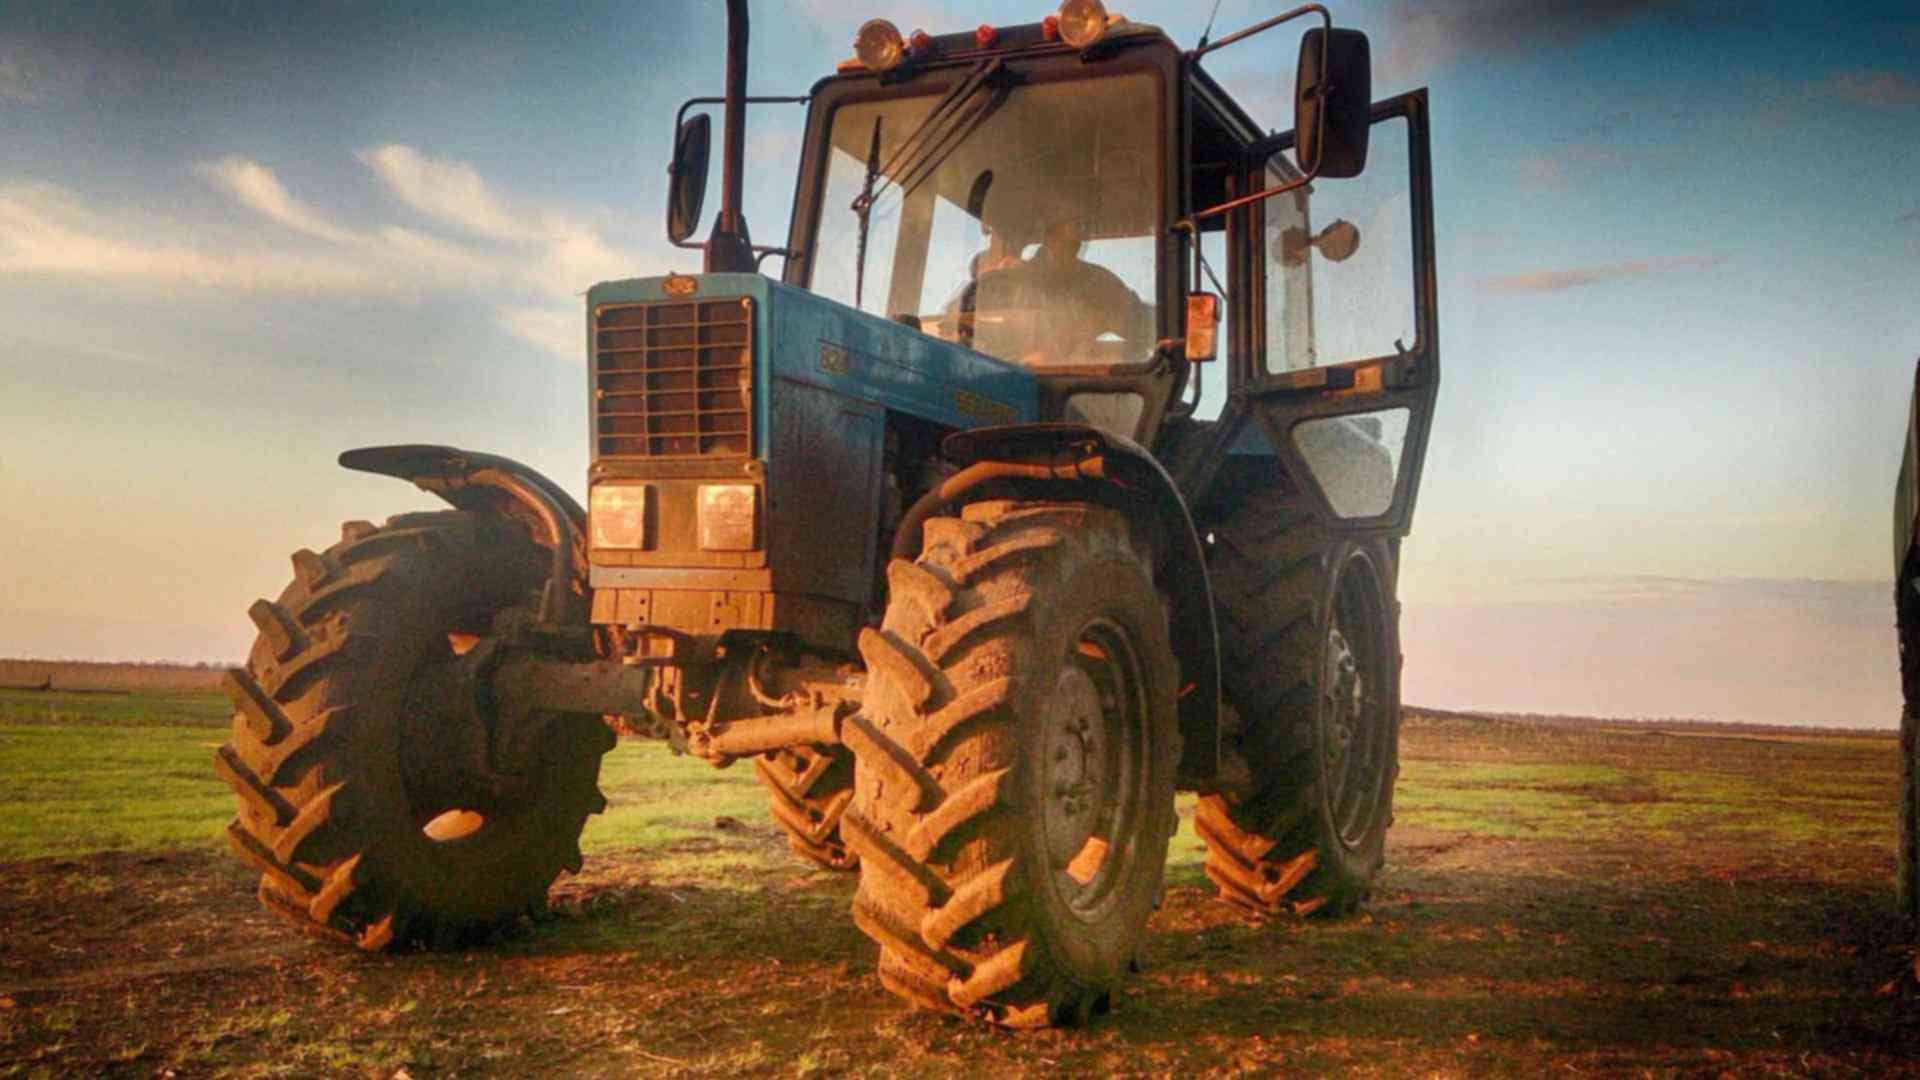 Мтз 82 100. Трактор МТЗ 82. Трактор МТЗ 80 В поле. Трактор МТЗ МТЗ 82. MTZ 80 tractor.